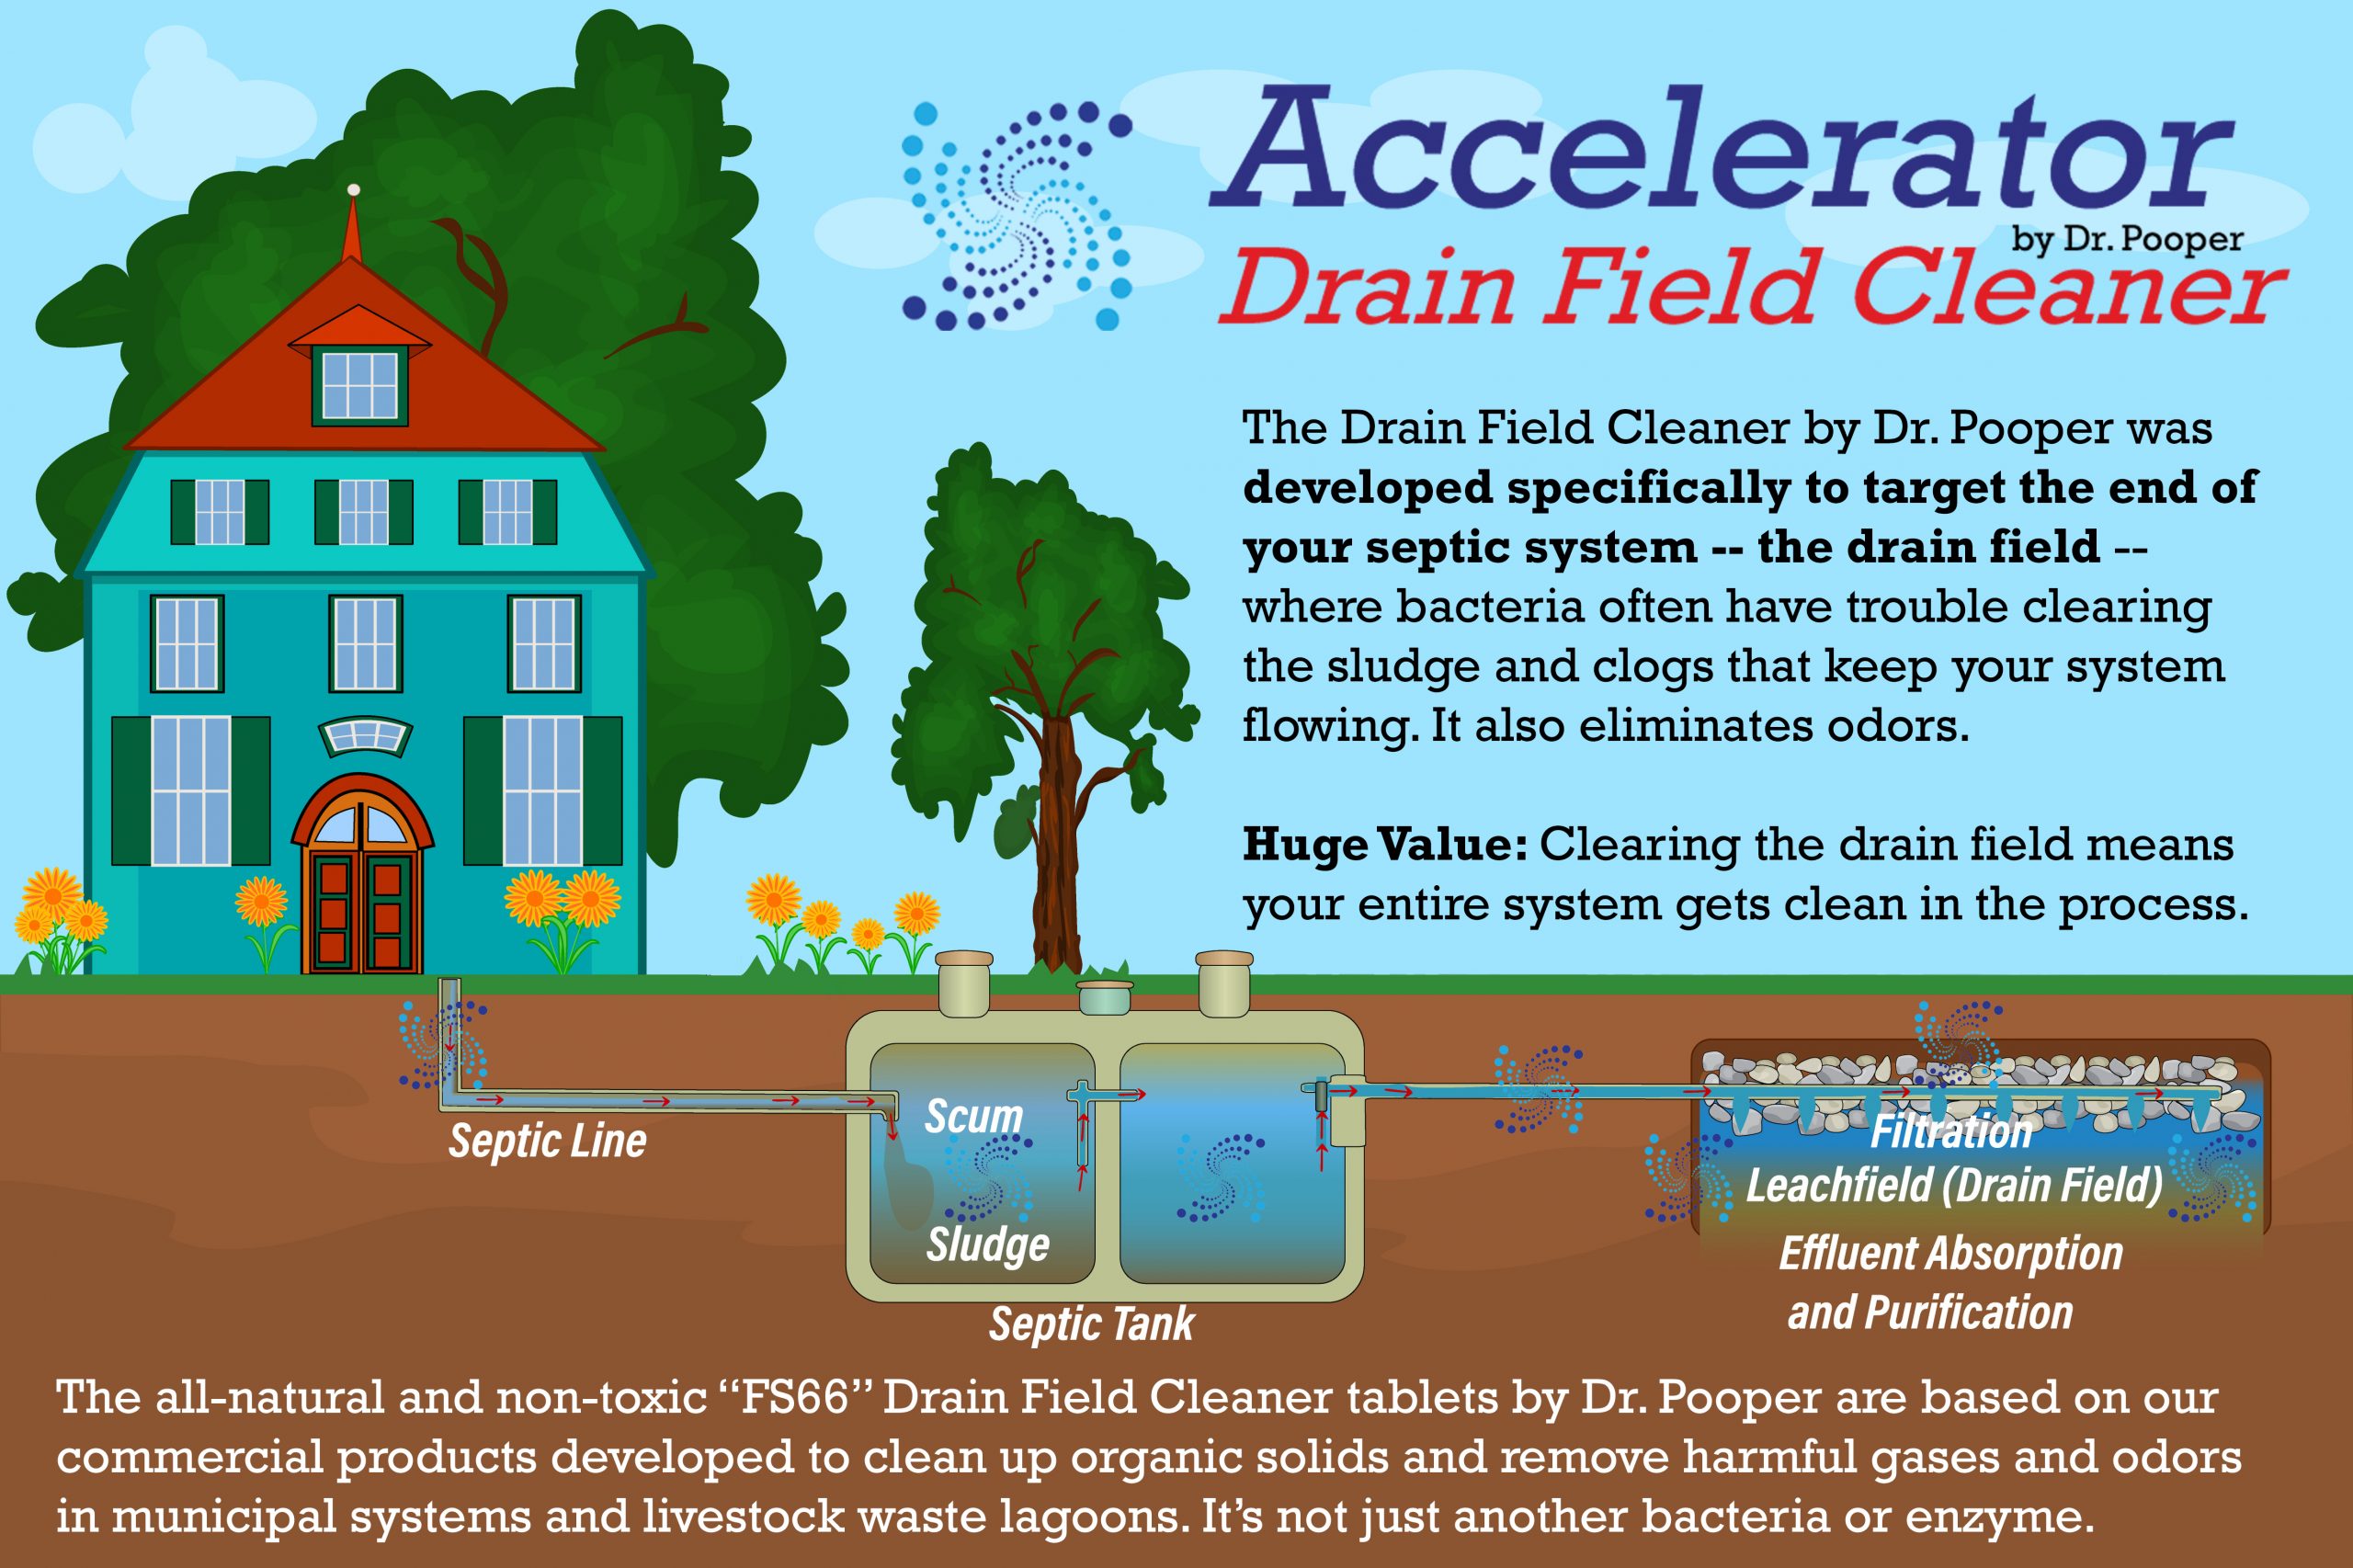 Drain Field Cleaner Treatment System by Dr. Pooper